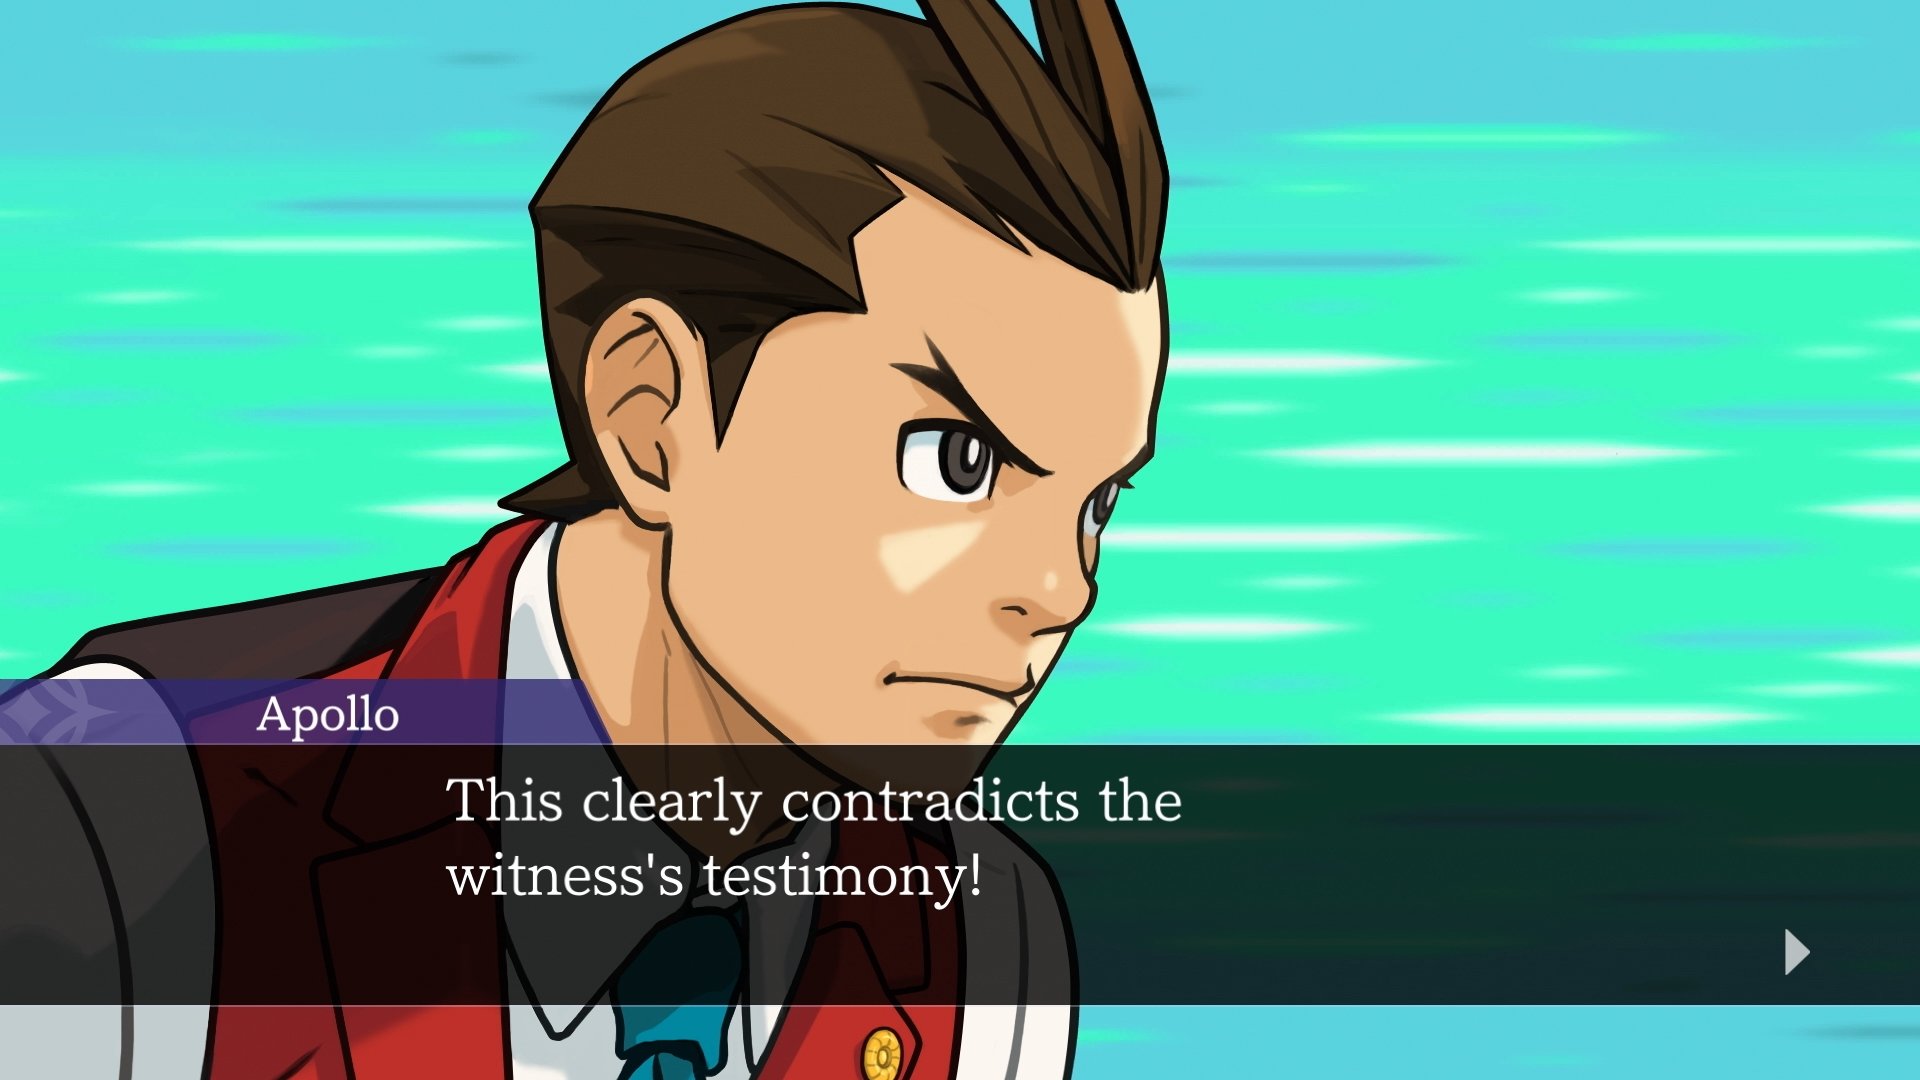 Apollo Justice: Ace Attorney Trilogy (Multi-Language) for PlayStation 4